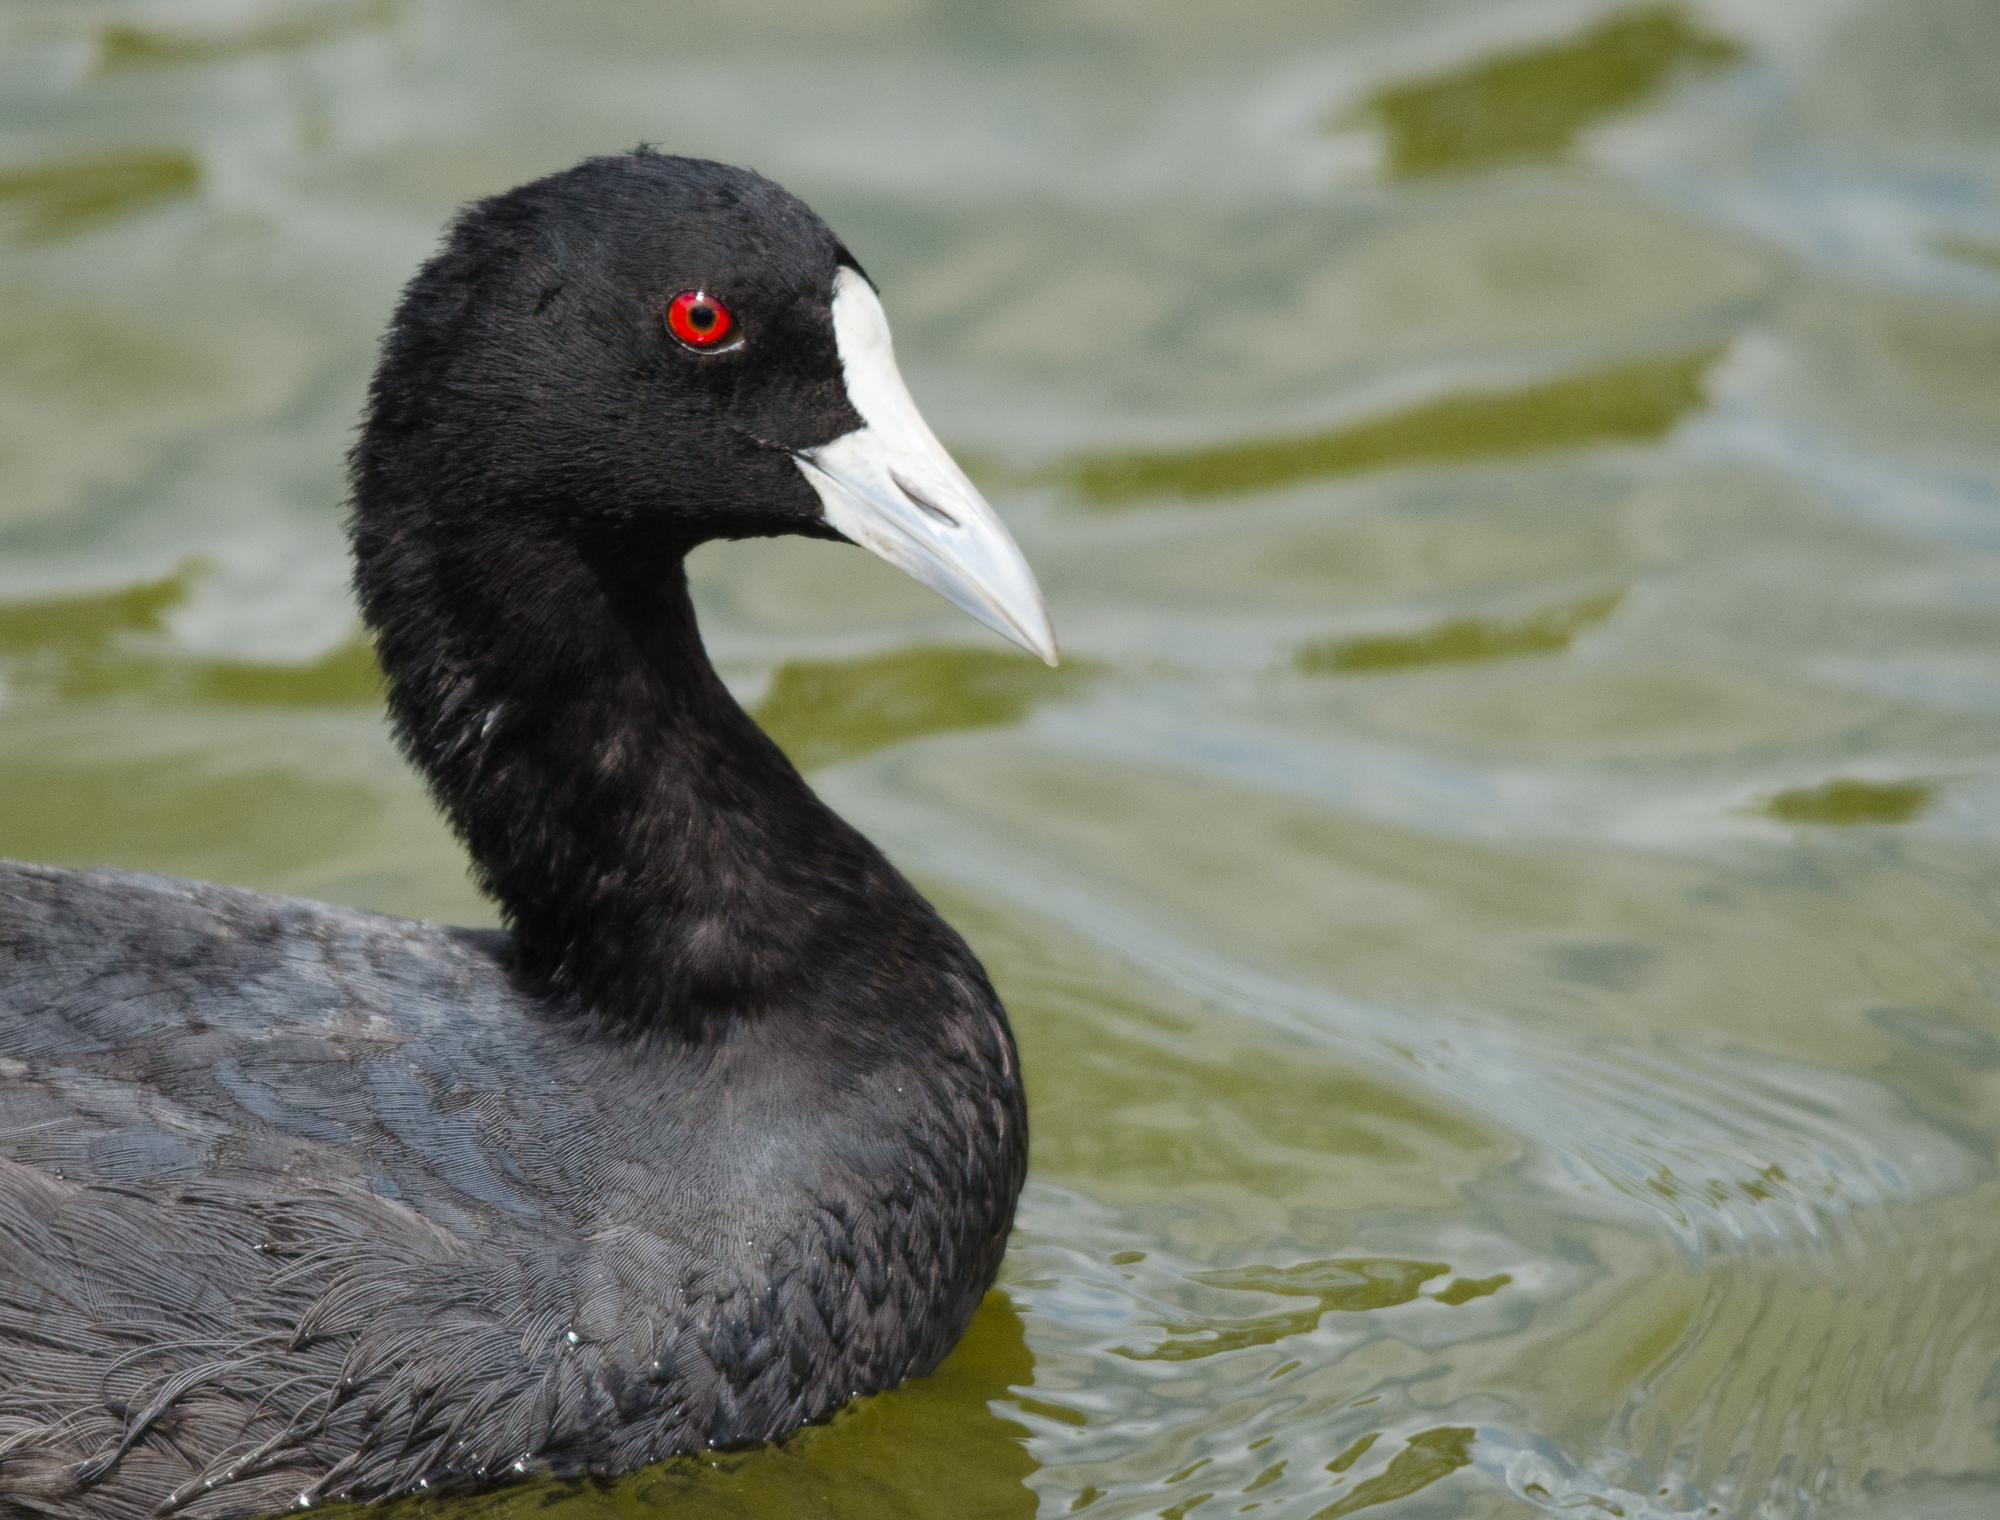 a black bird sitting in the water and it looks like he has red eyes